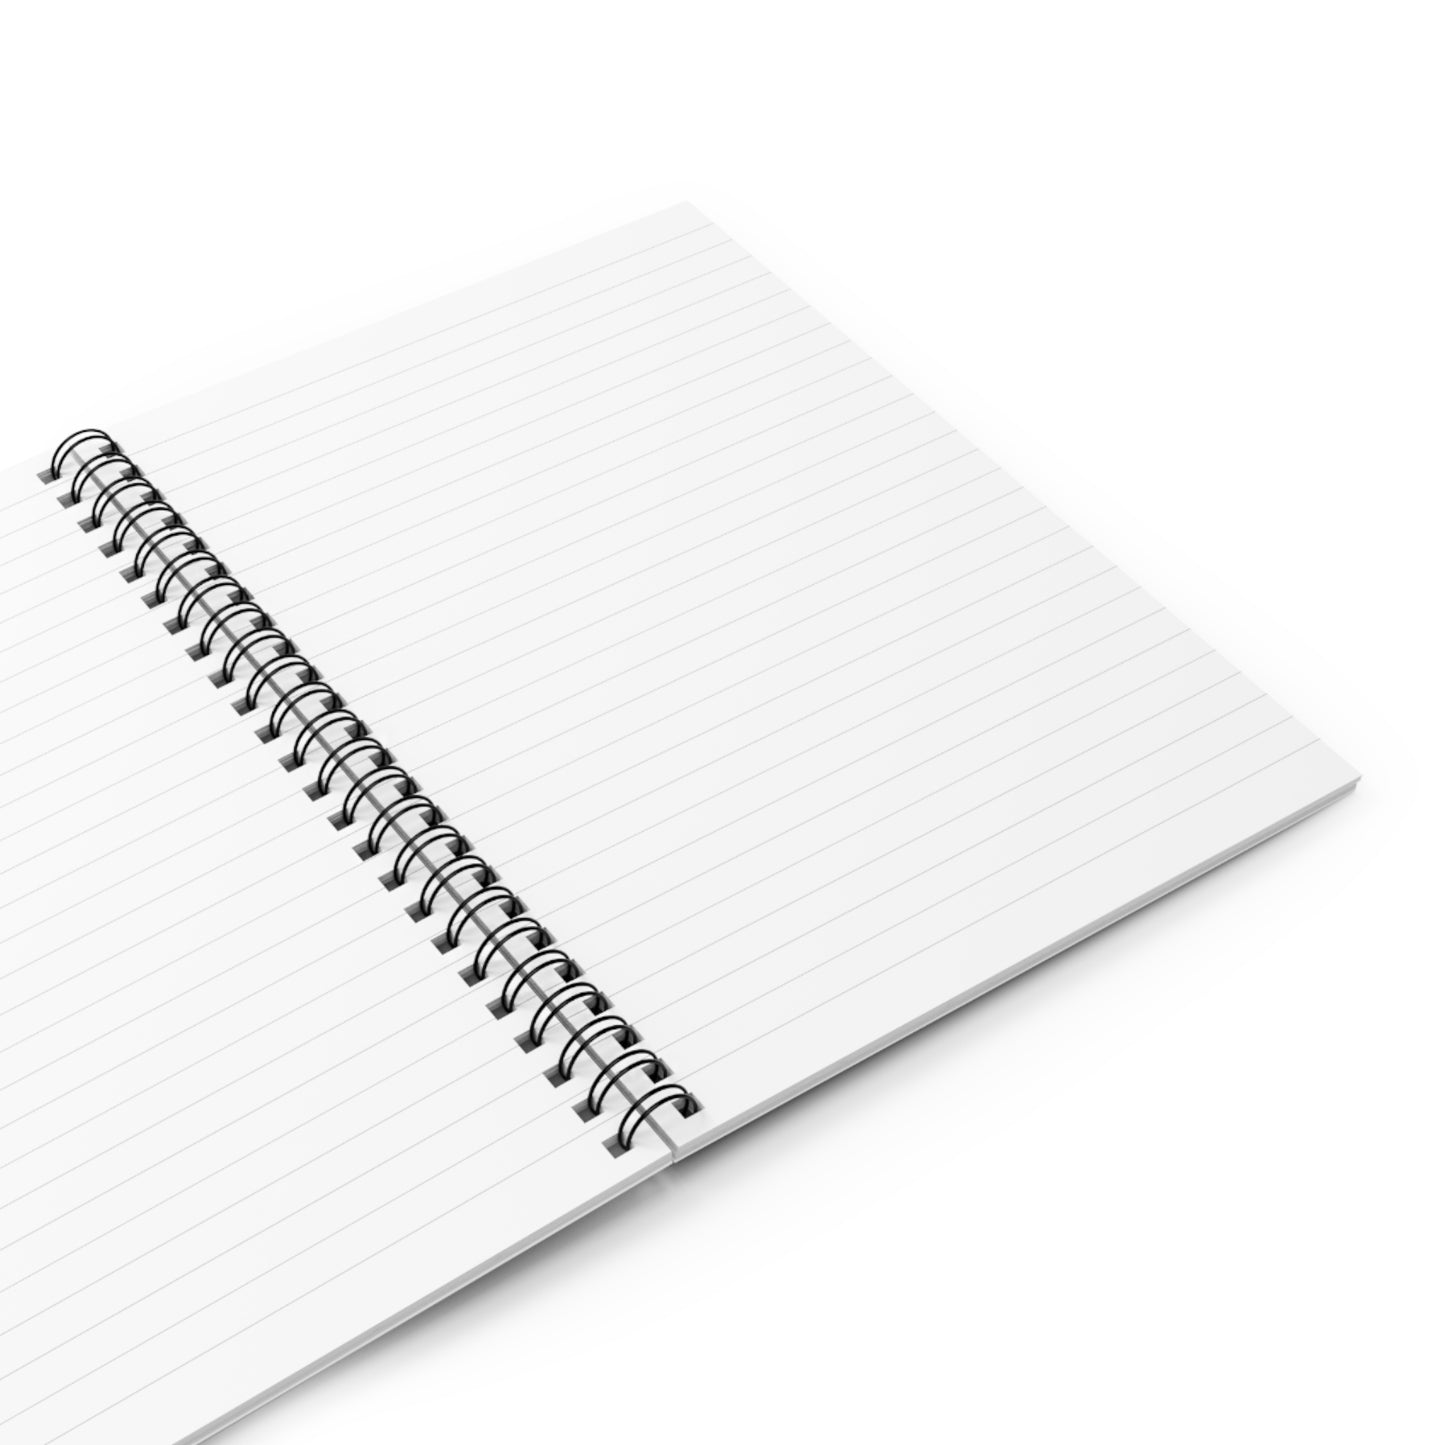 Philo Affiliate Wraps & Butterflies (white) - Spiral Notebook Ruled Line